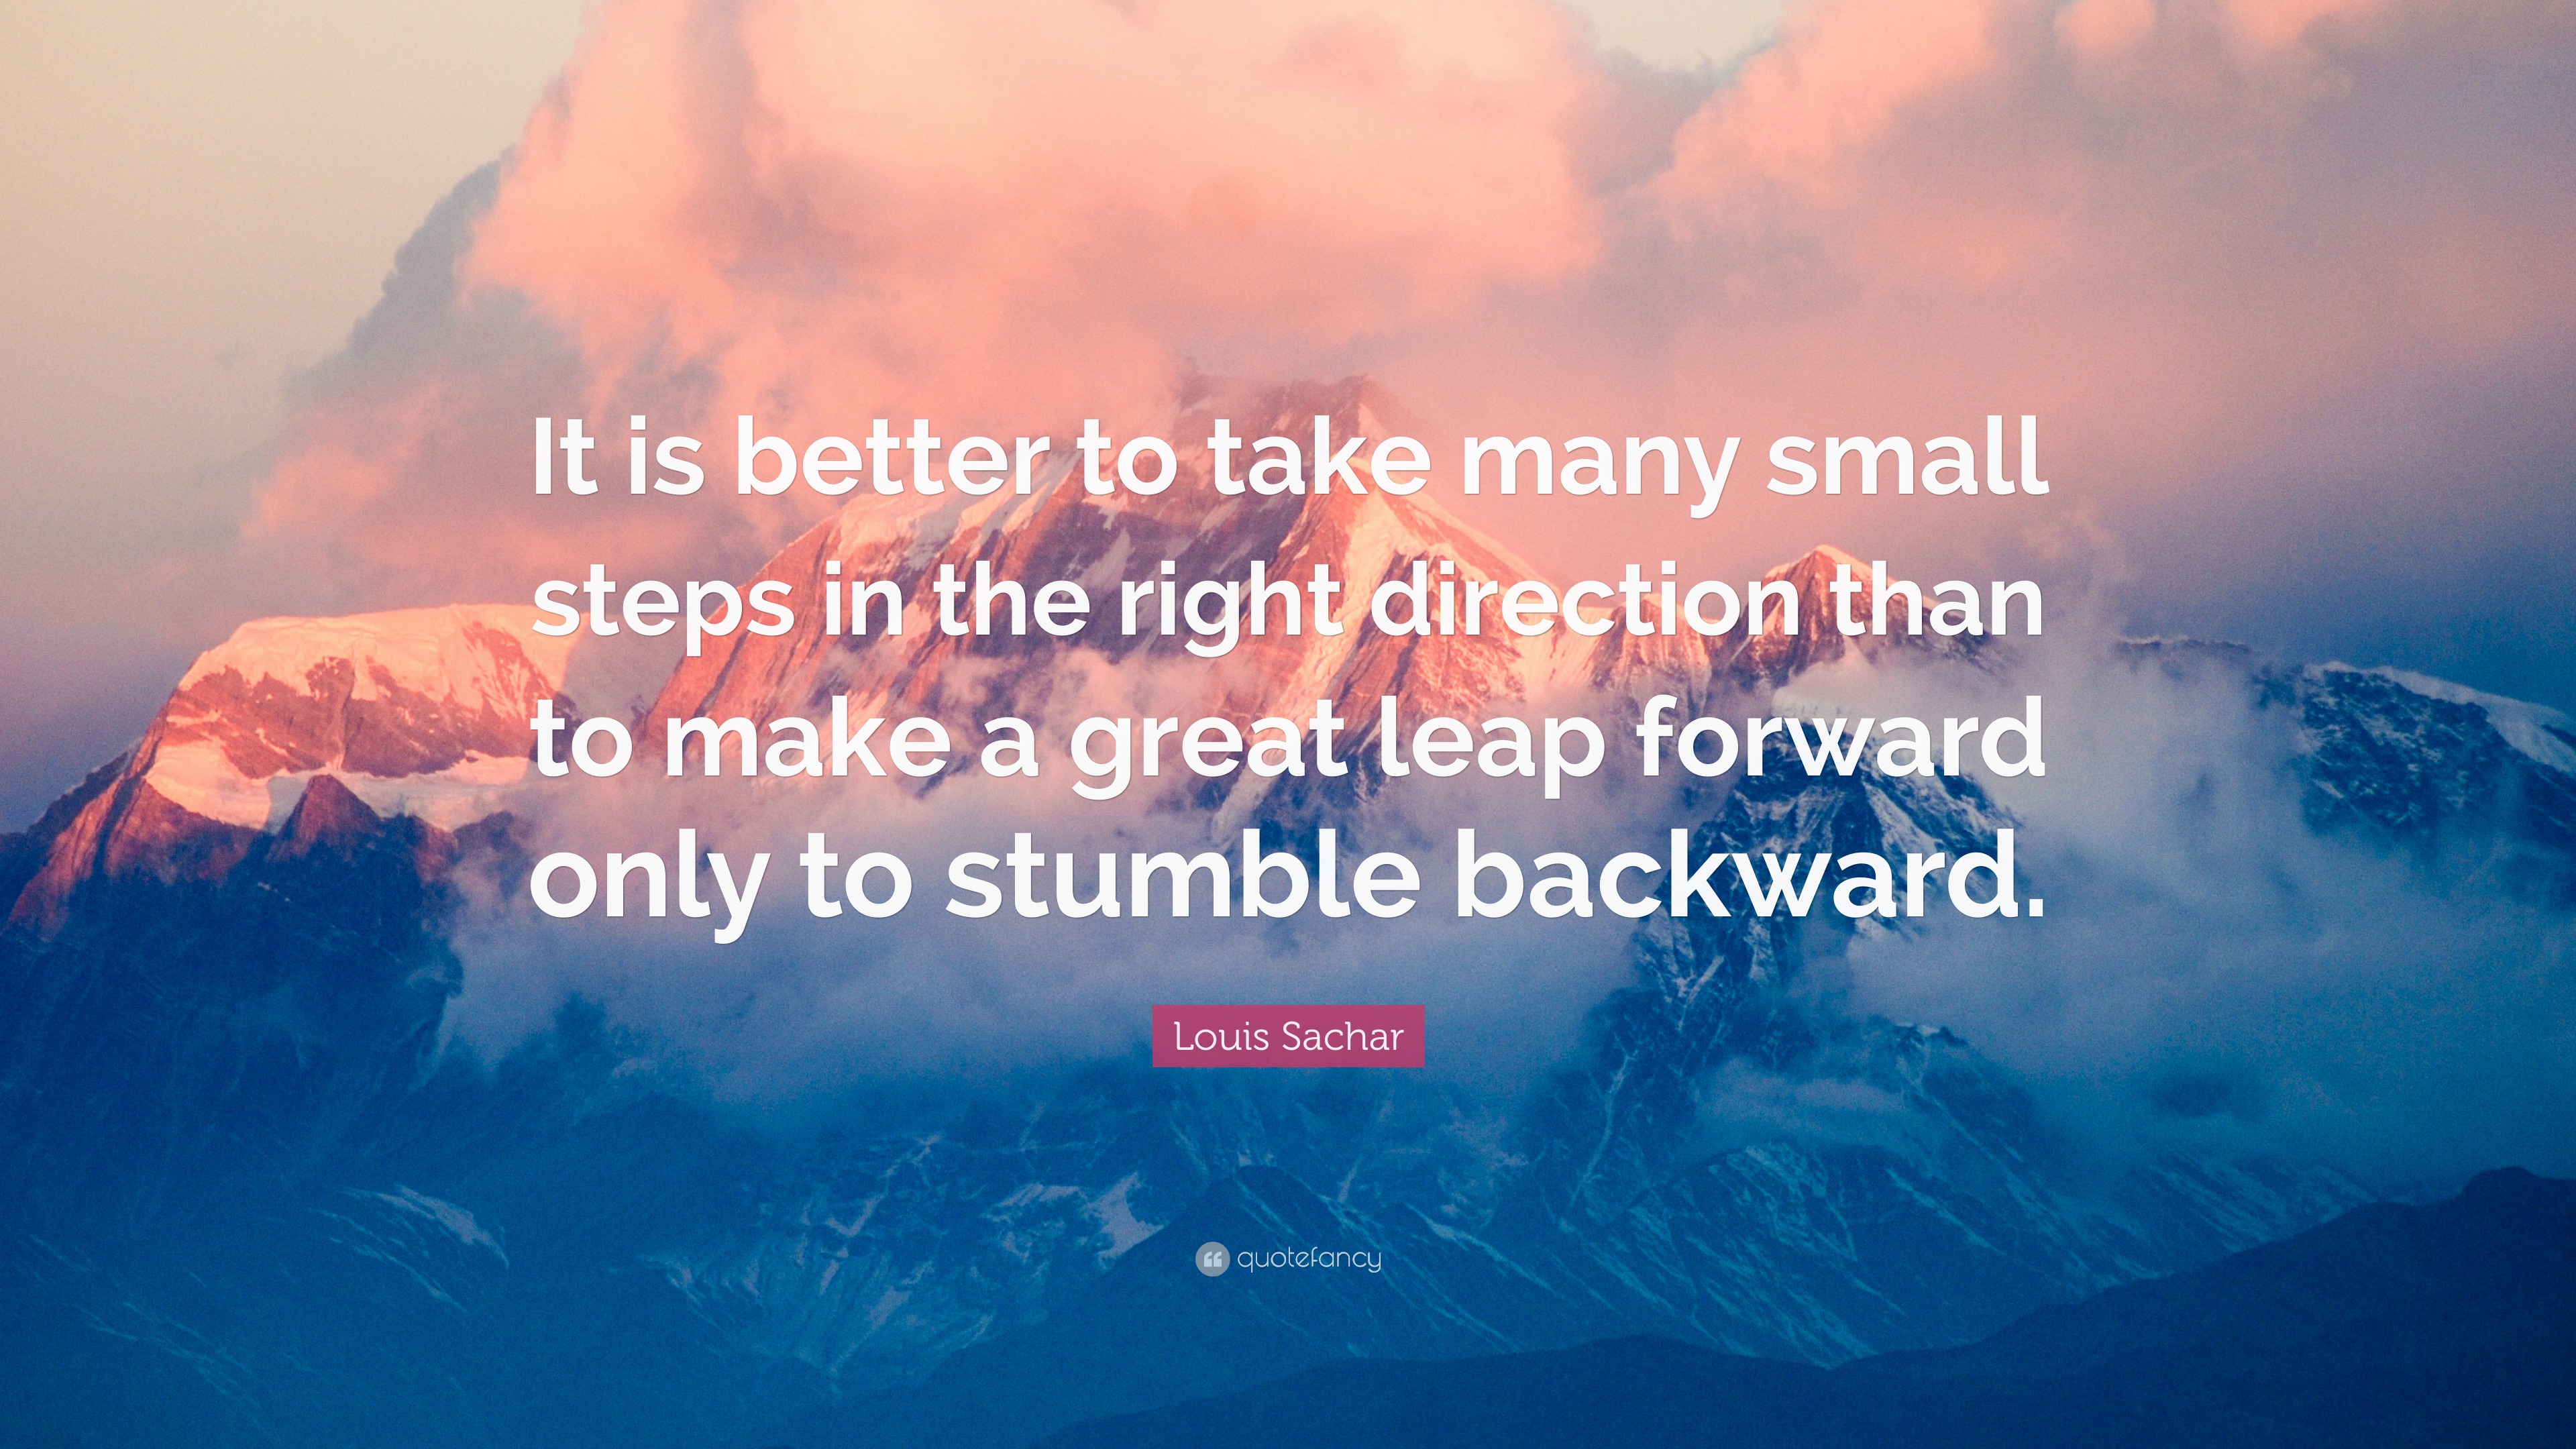 Louis Sachar Quote: “It is better to take many small steps in the right  direction than